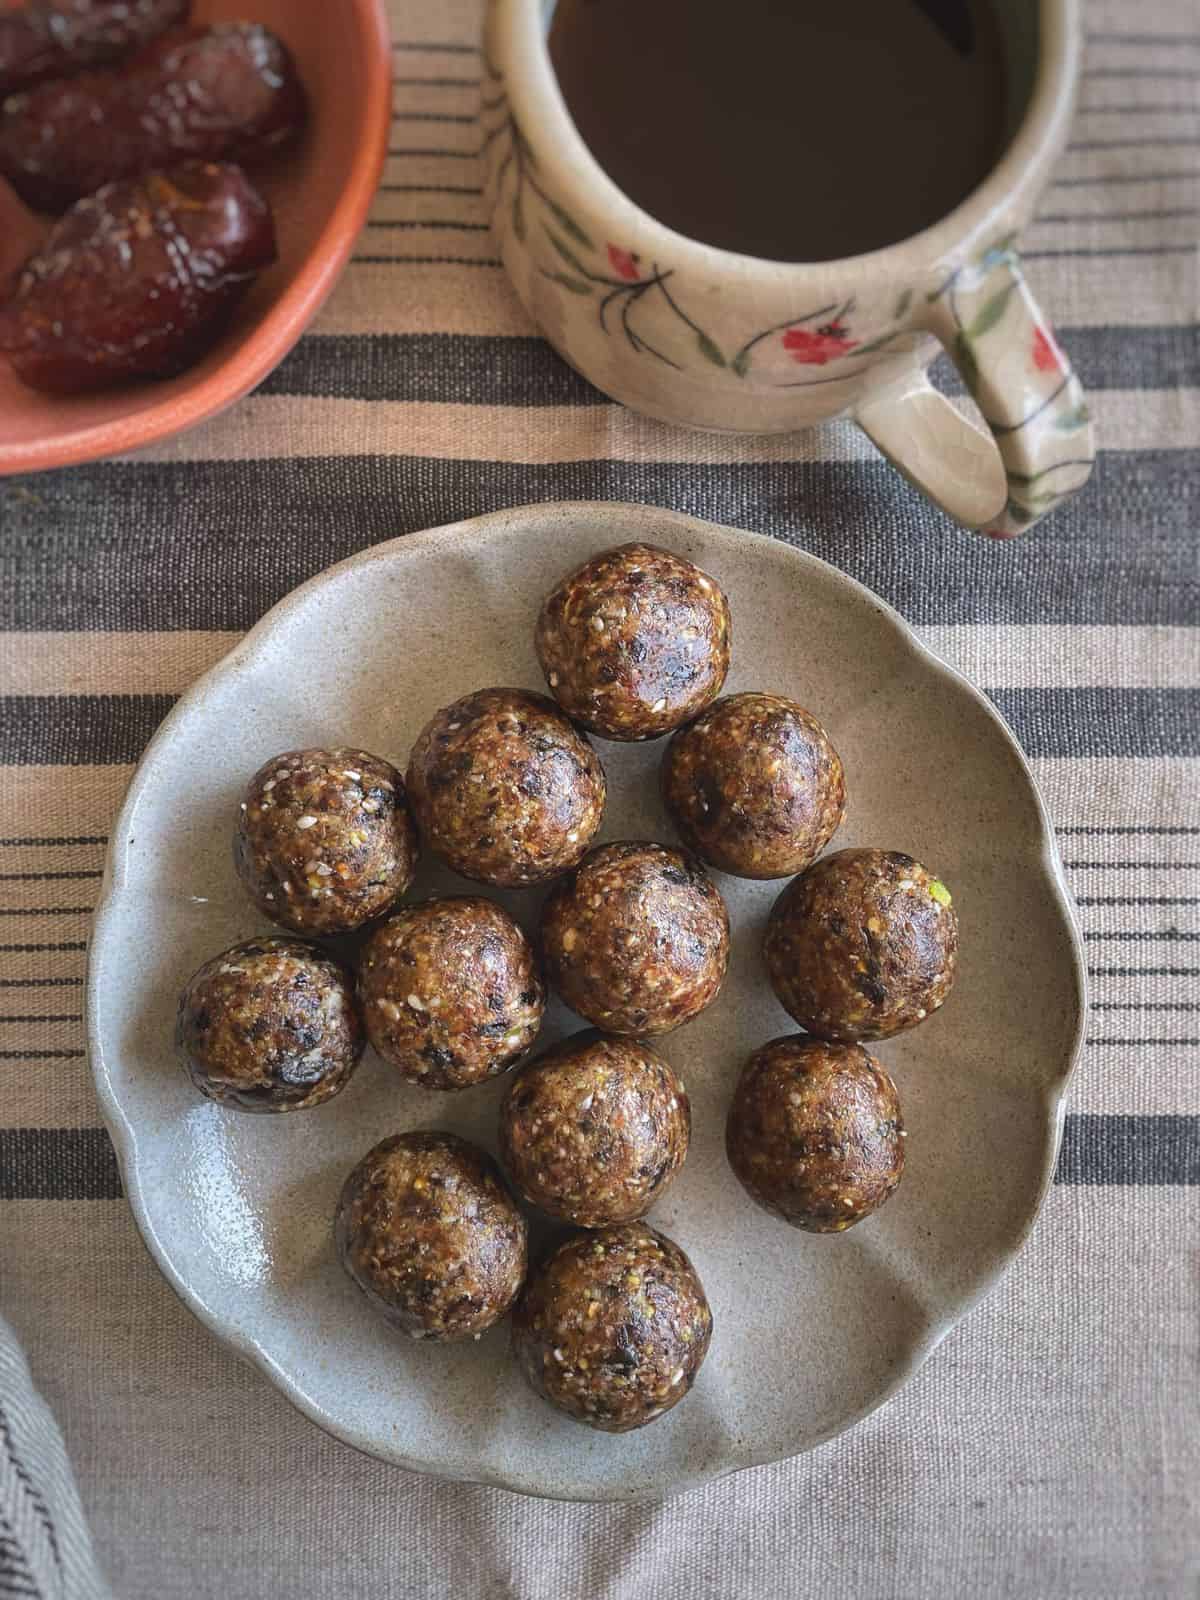 A plate of energy balls served with cuppa.